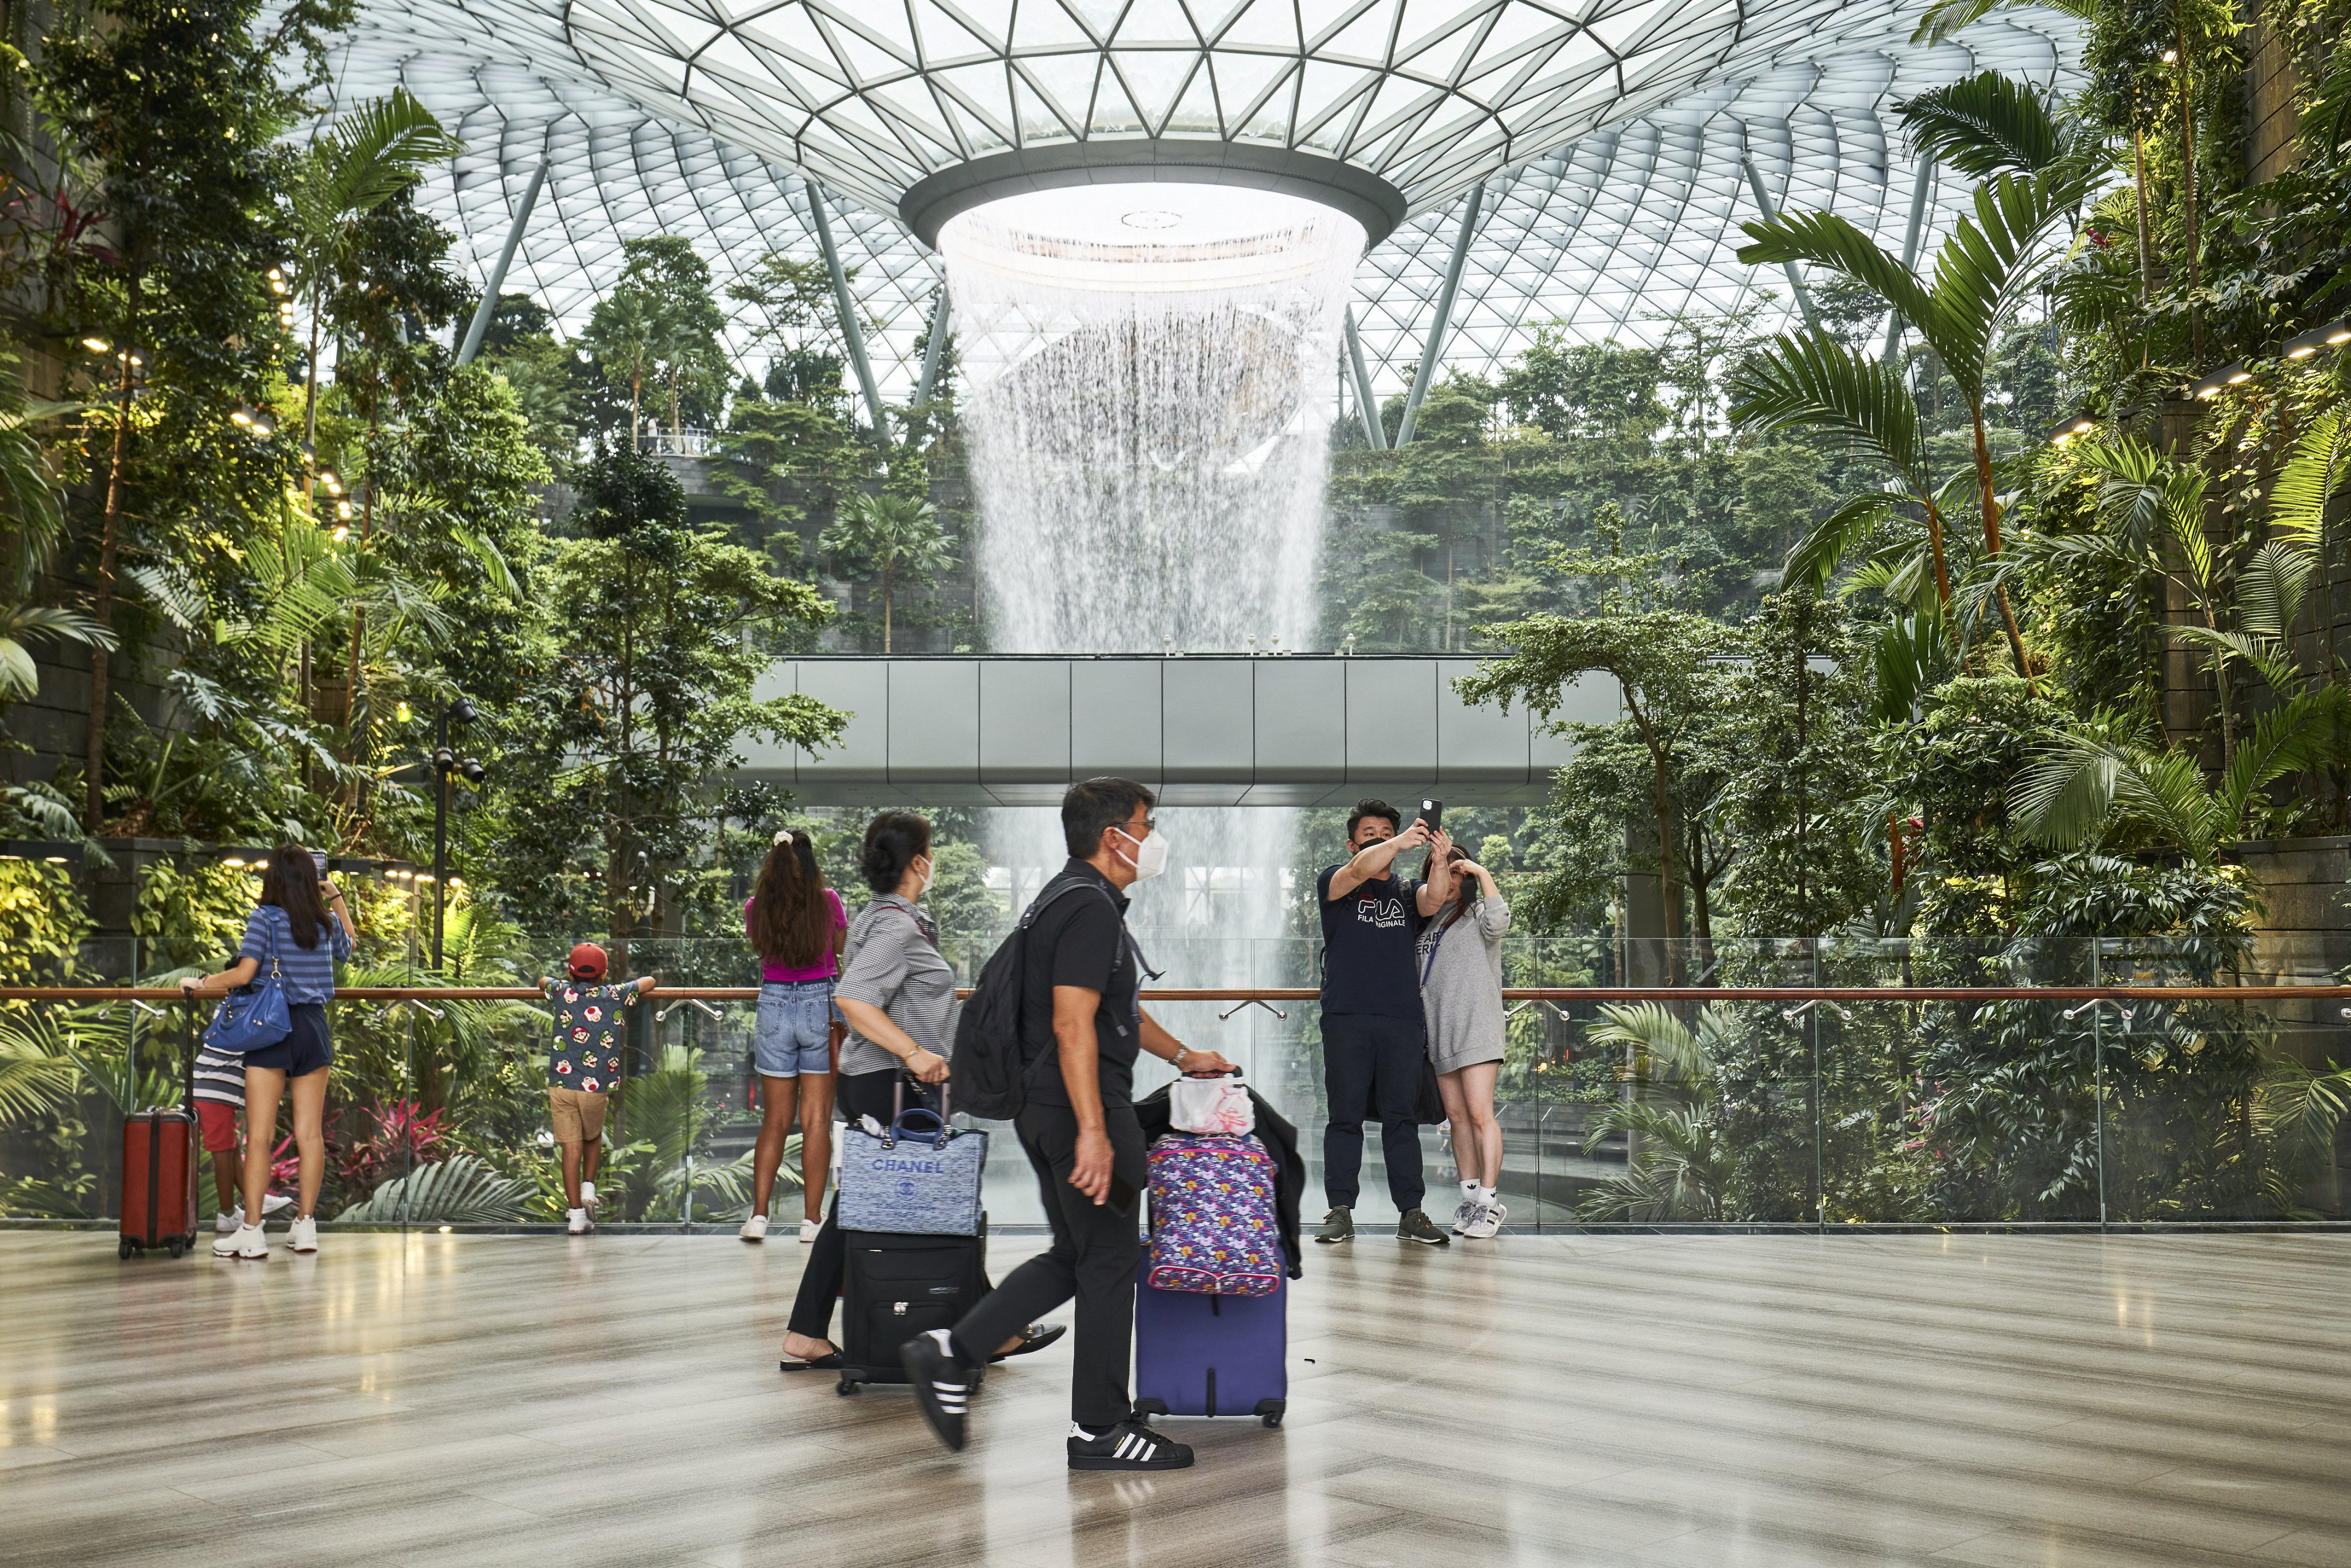 A view of Singapore’s Jewel Changi Airport in April. A nature-themed entertainment and retail complex, it is now seeing rising numbers of visitors as pandemic restrictions ease worldwide. Photo: Bloomberg